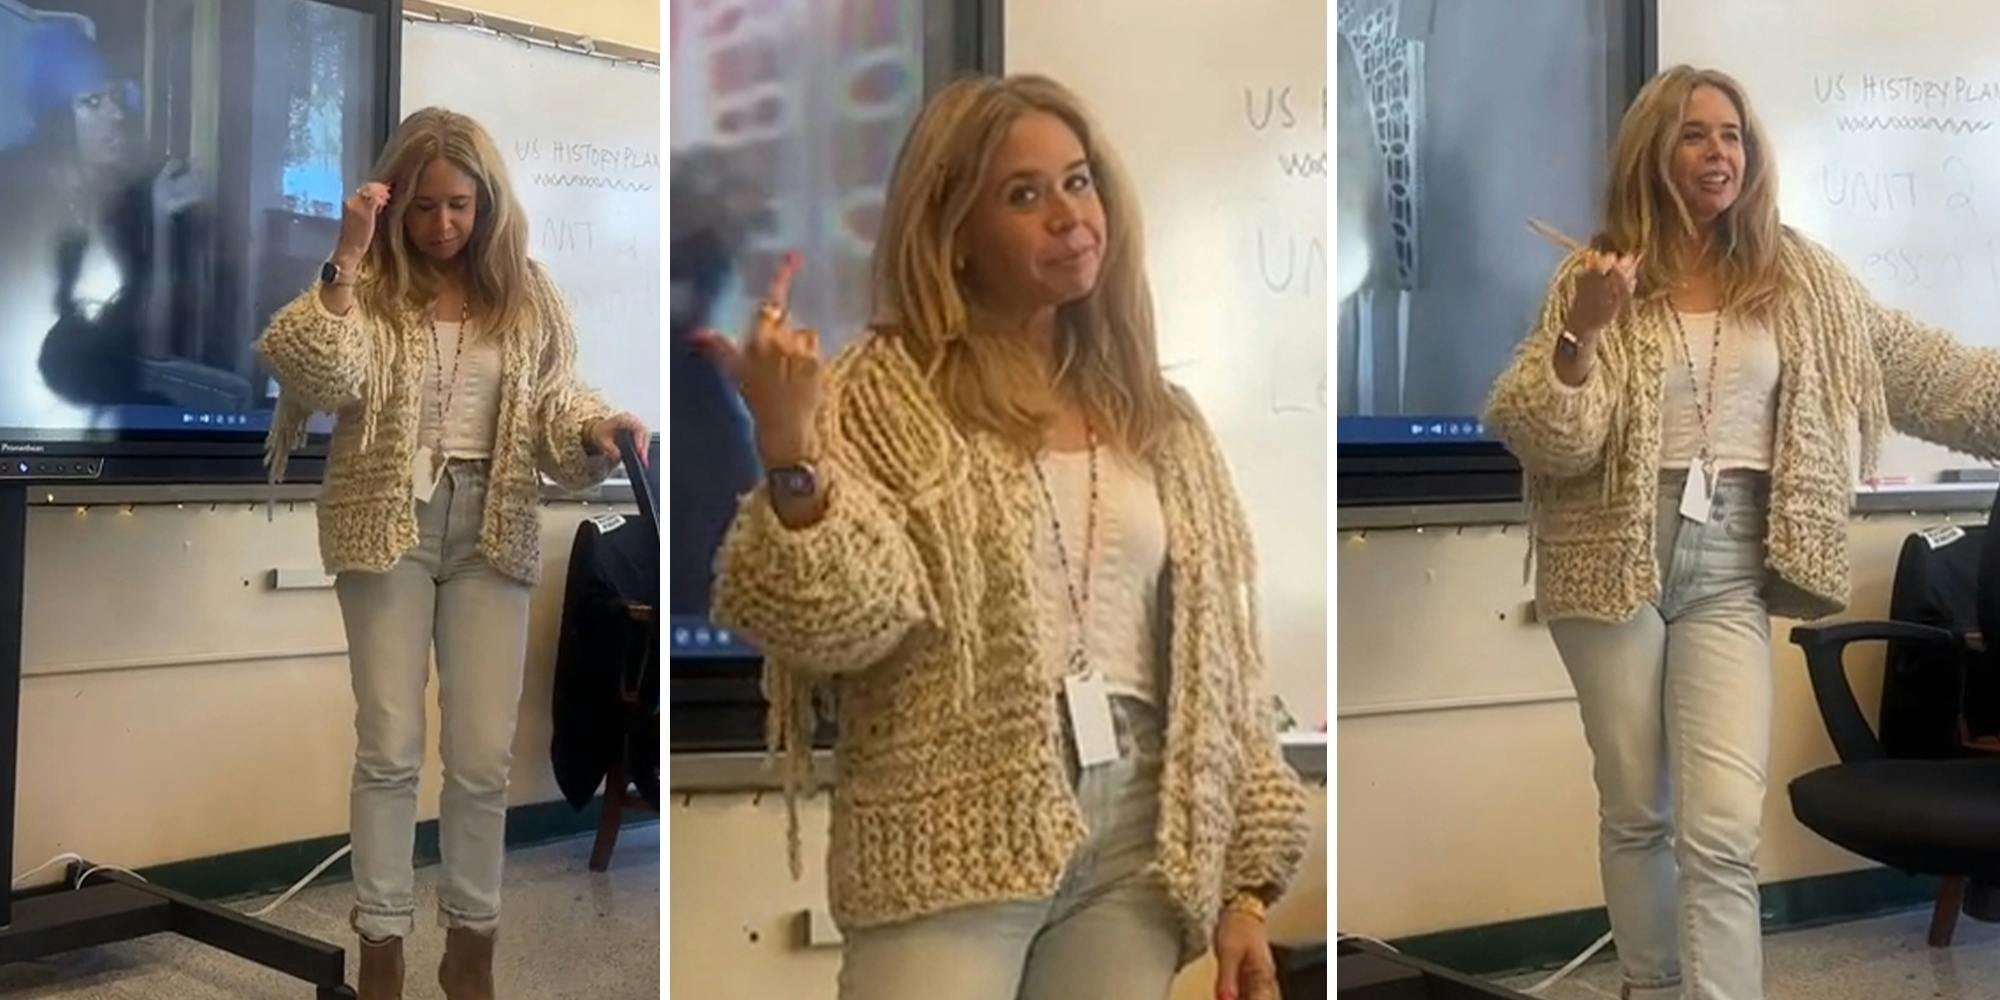 'She really did hold it down': Teacher shows students she's name-checked in rap song